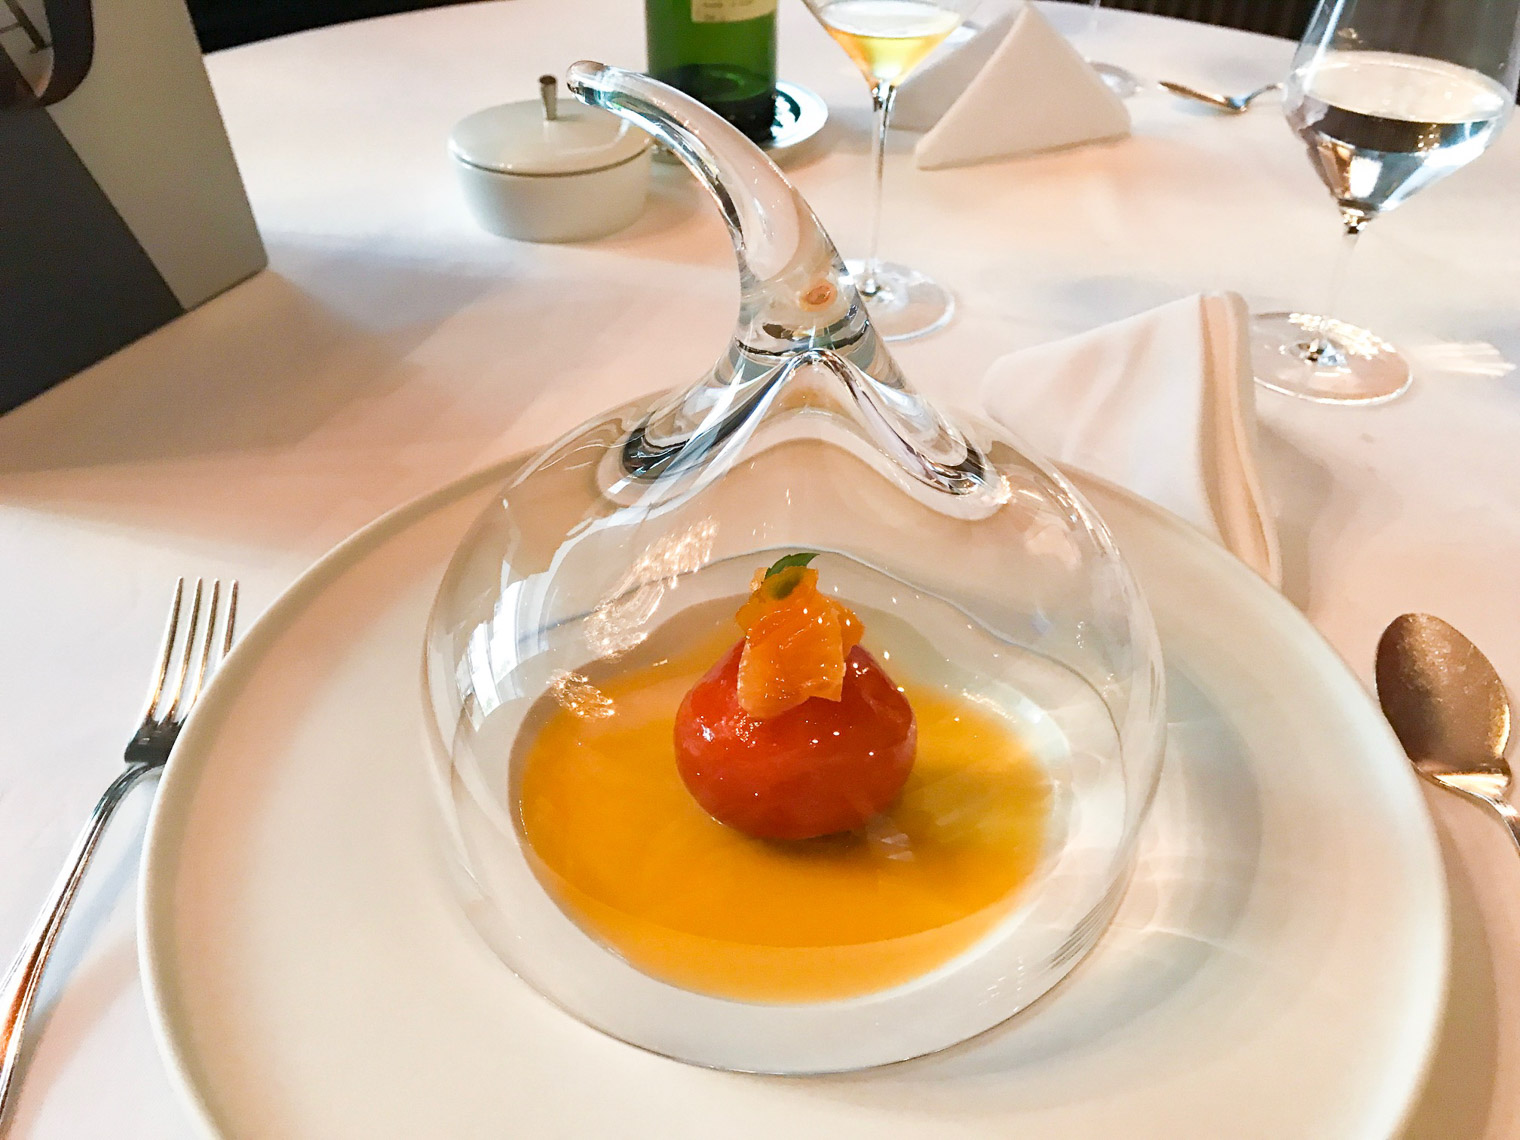 Clementine pudding at Les Amis restaurant in SIngapore